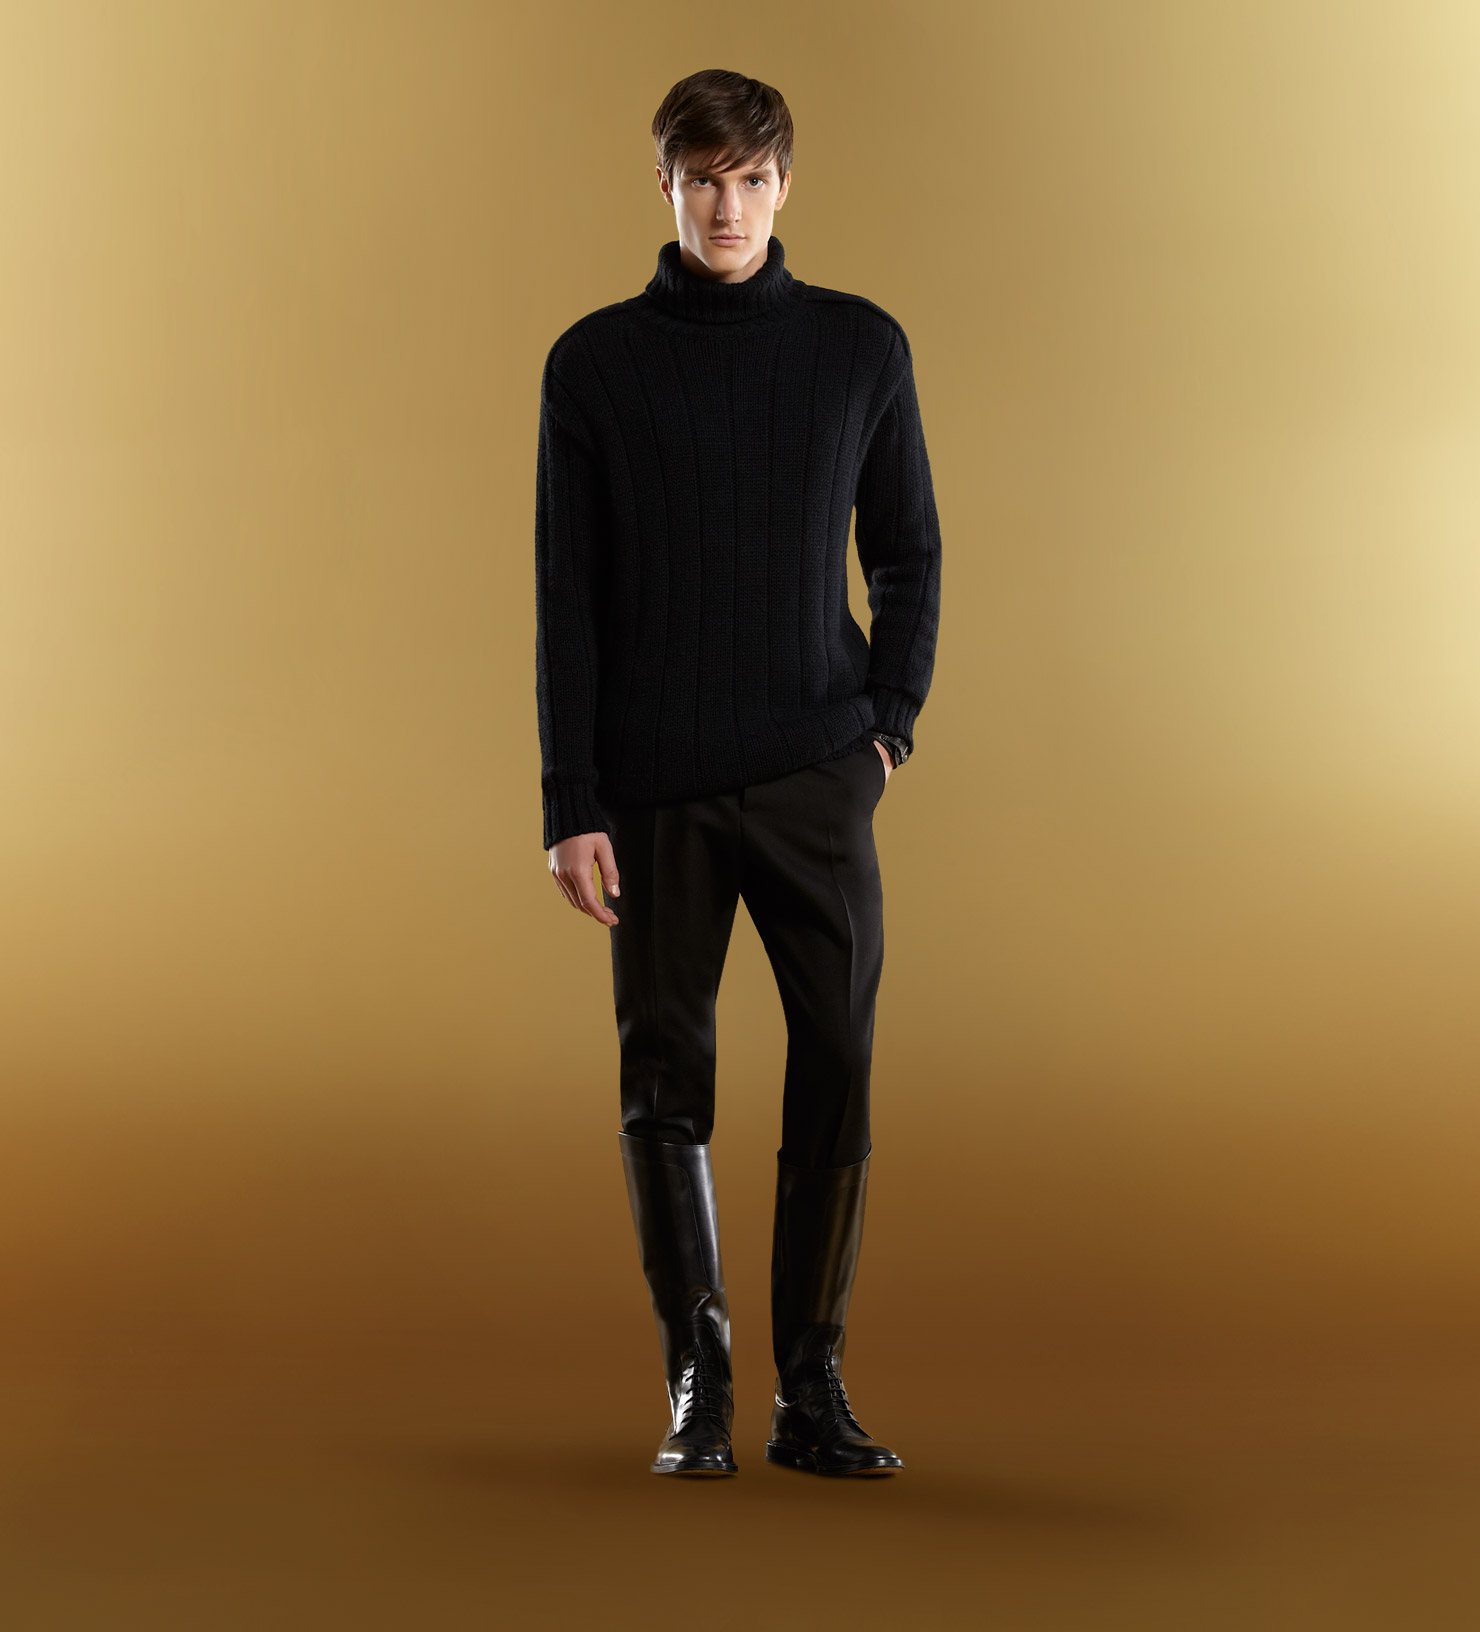 Gucci fall winter 2012/2013 collection for men